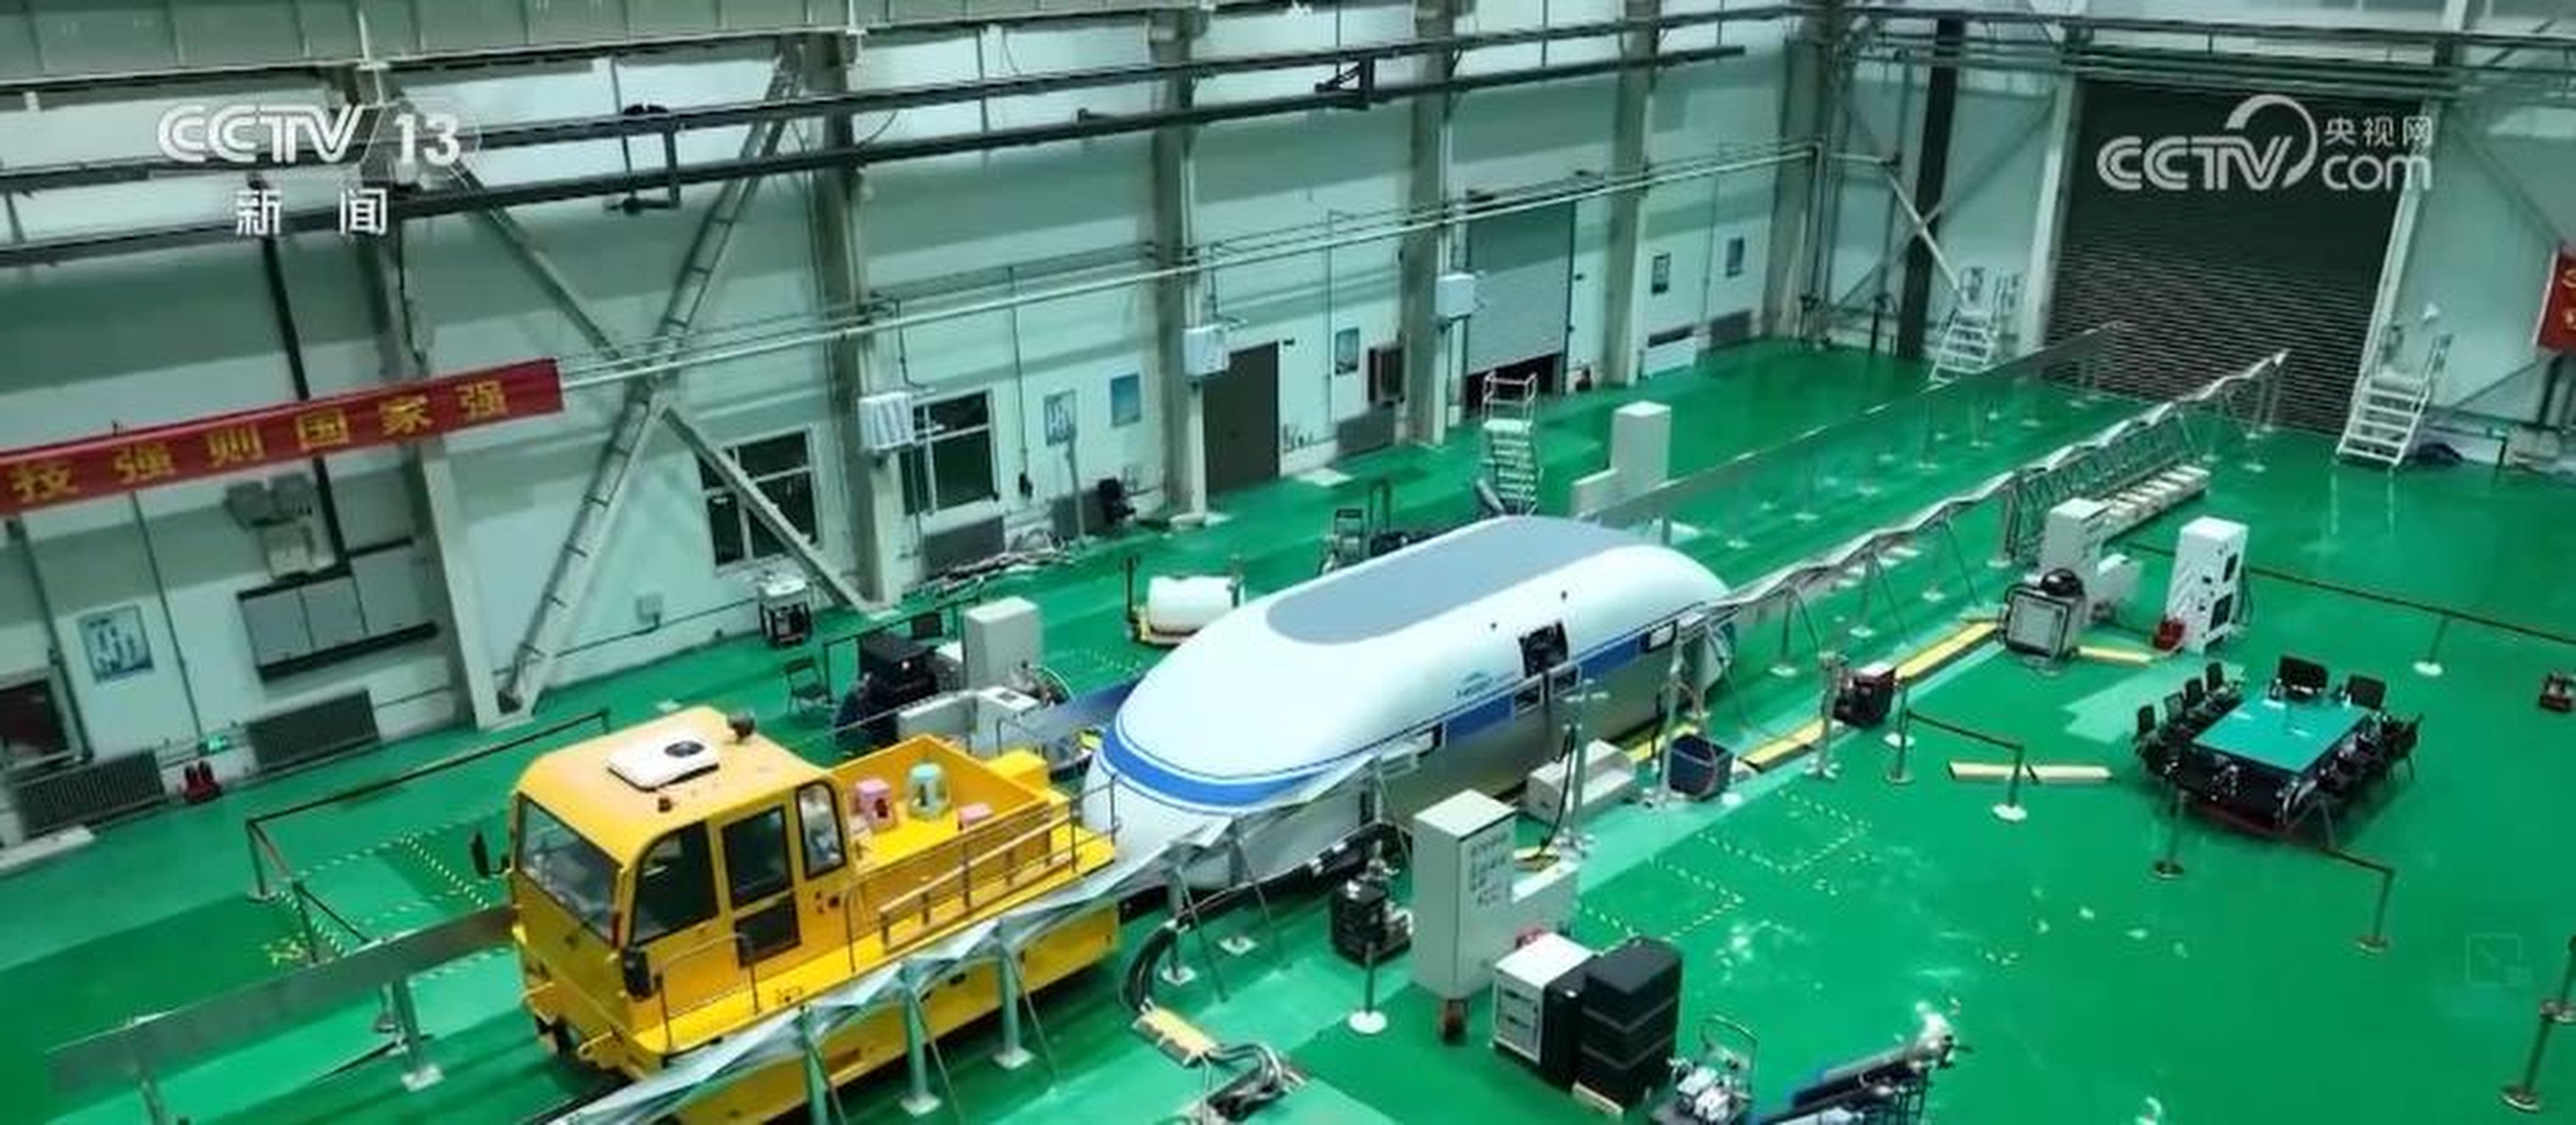 The China Aerospace Science and Industry Corporation said the latest testing of its high-speed flier was carried out on its full-scale 2km test line in the northern province of Shanxi. Photo: CCTV